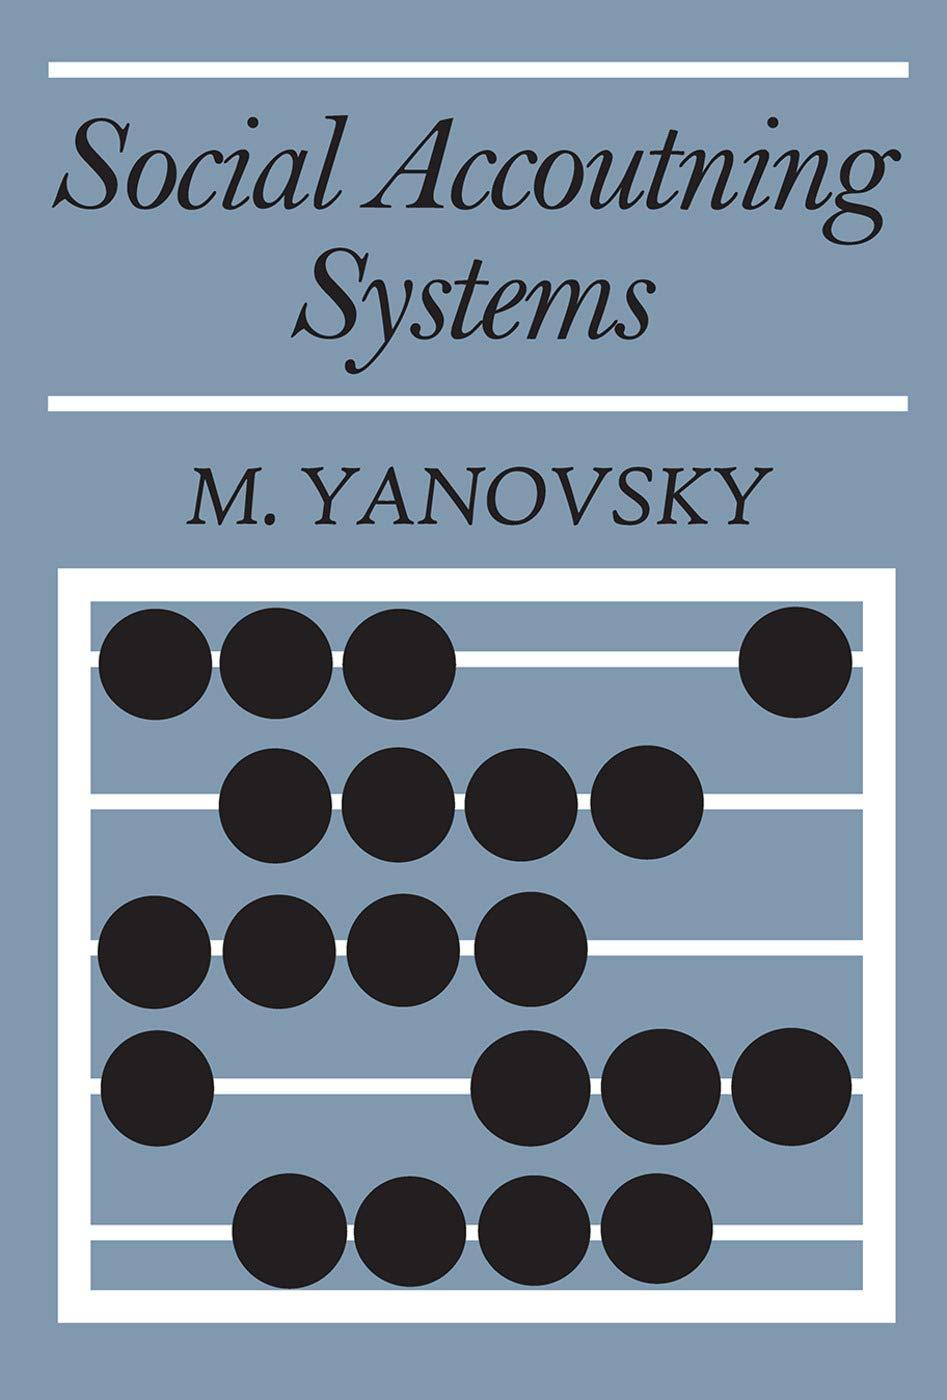 social accounting systems 1st edition louis filler, m. yanovsky 0202309029, 978-0202309026